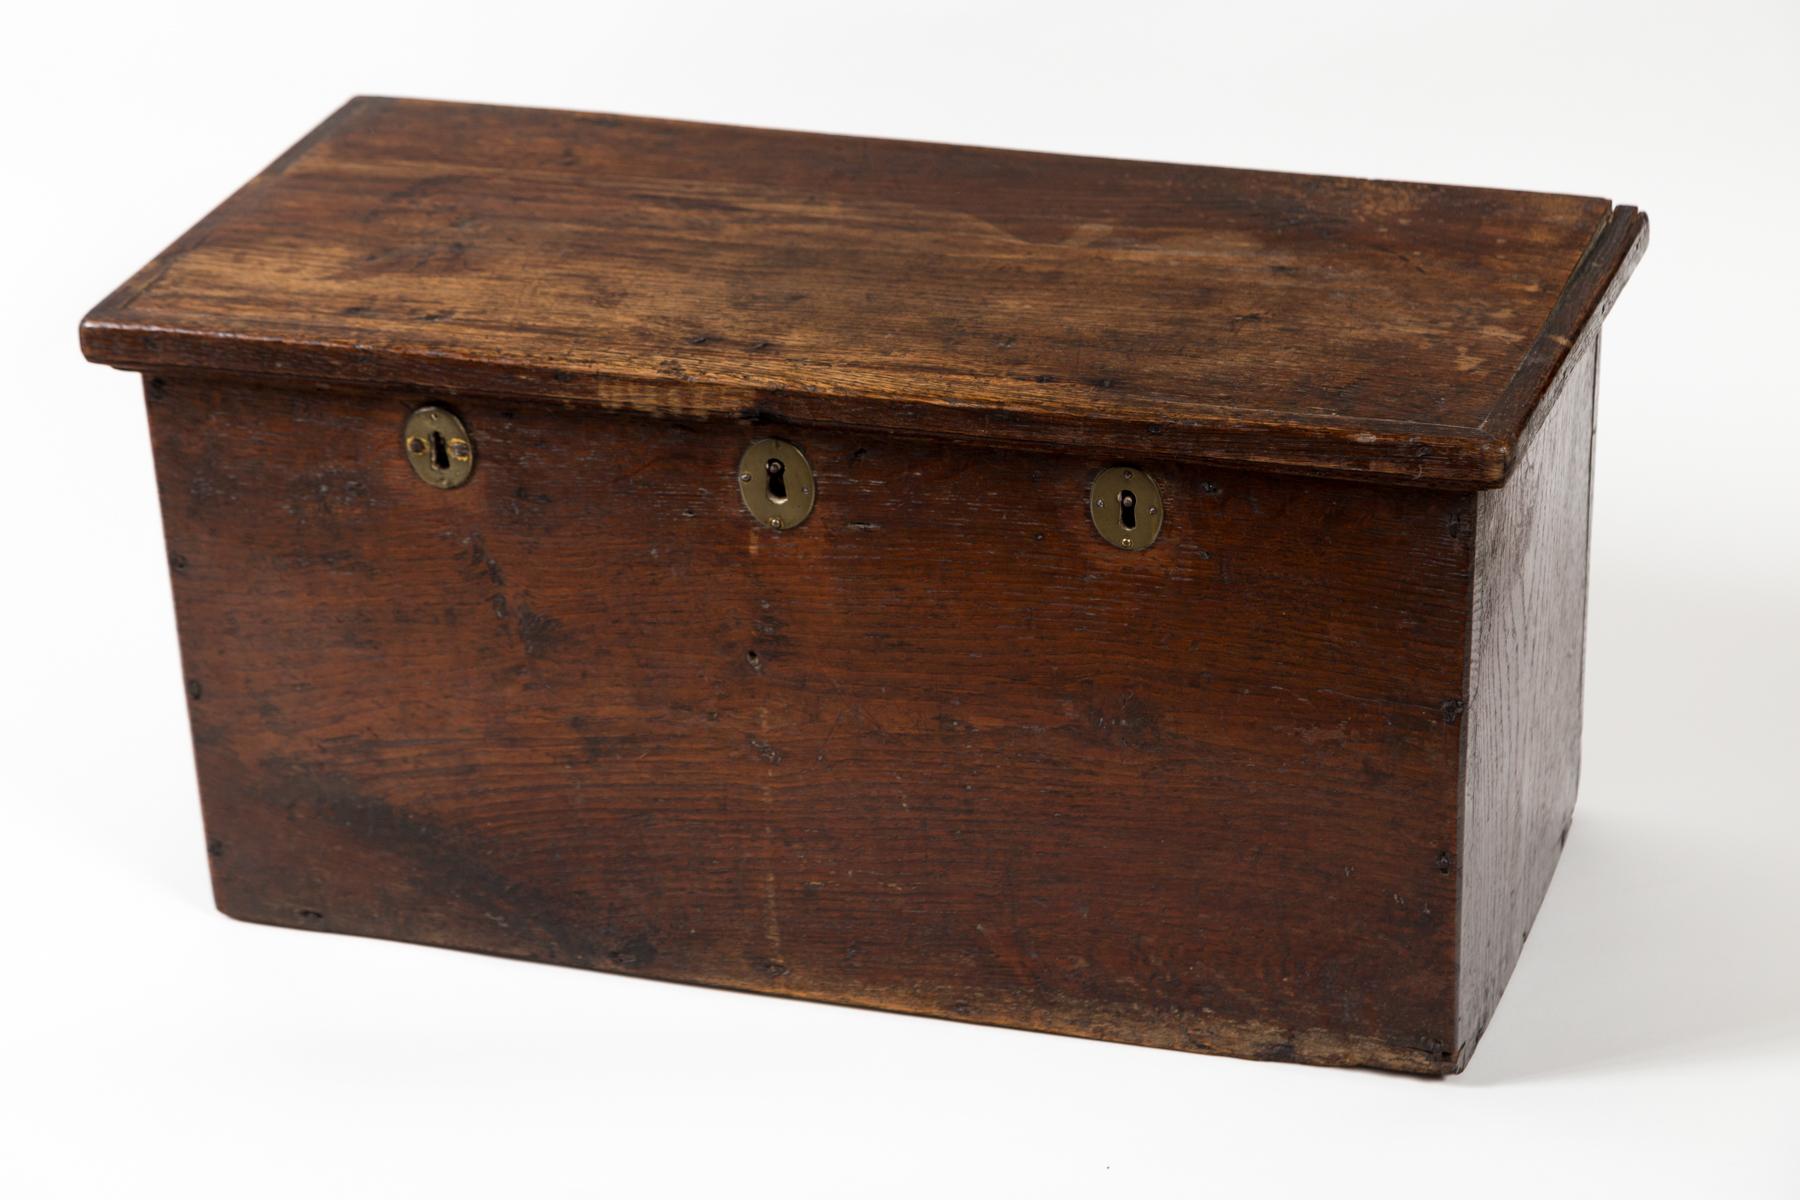 European Walnut Storage Chest, early 19th Century. An early chest with triple brass locks and hand-forged iron strap hinges.